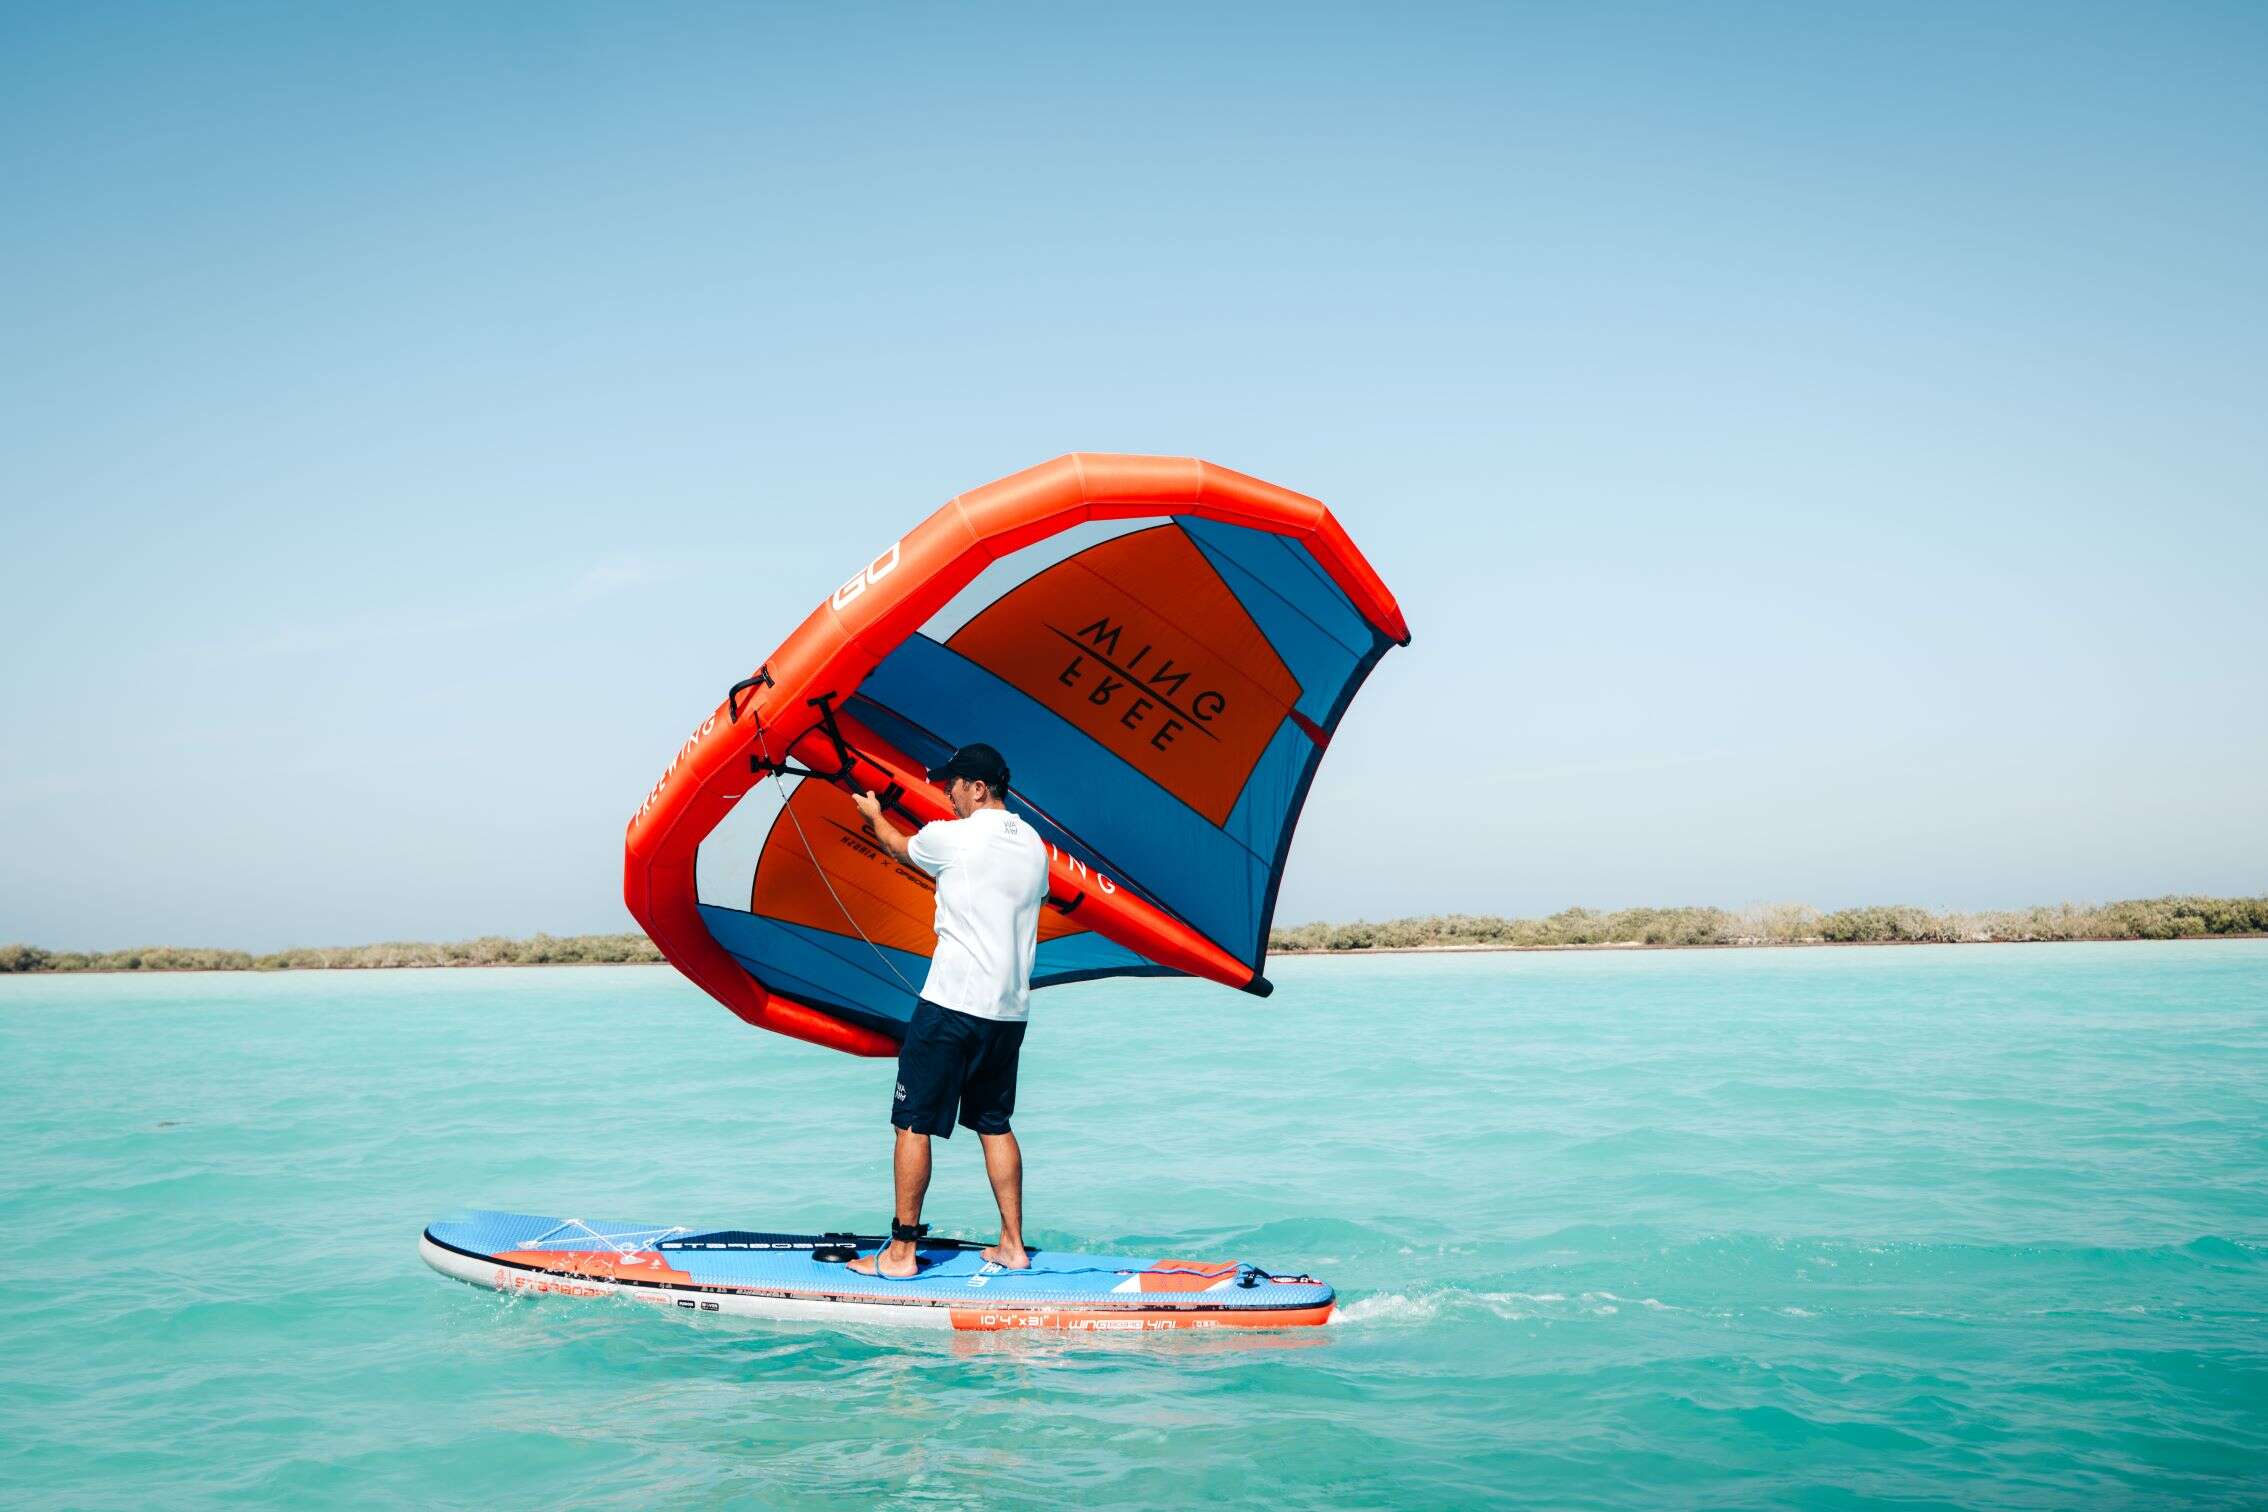 Red Sea Watersports